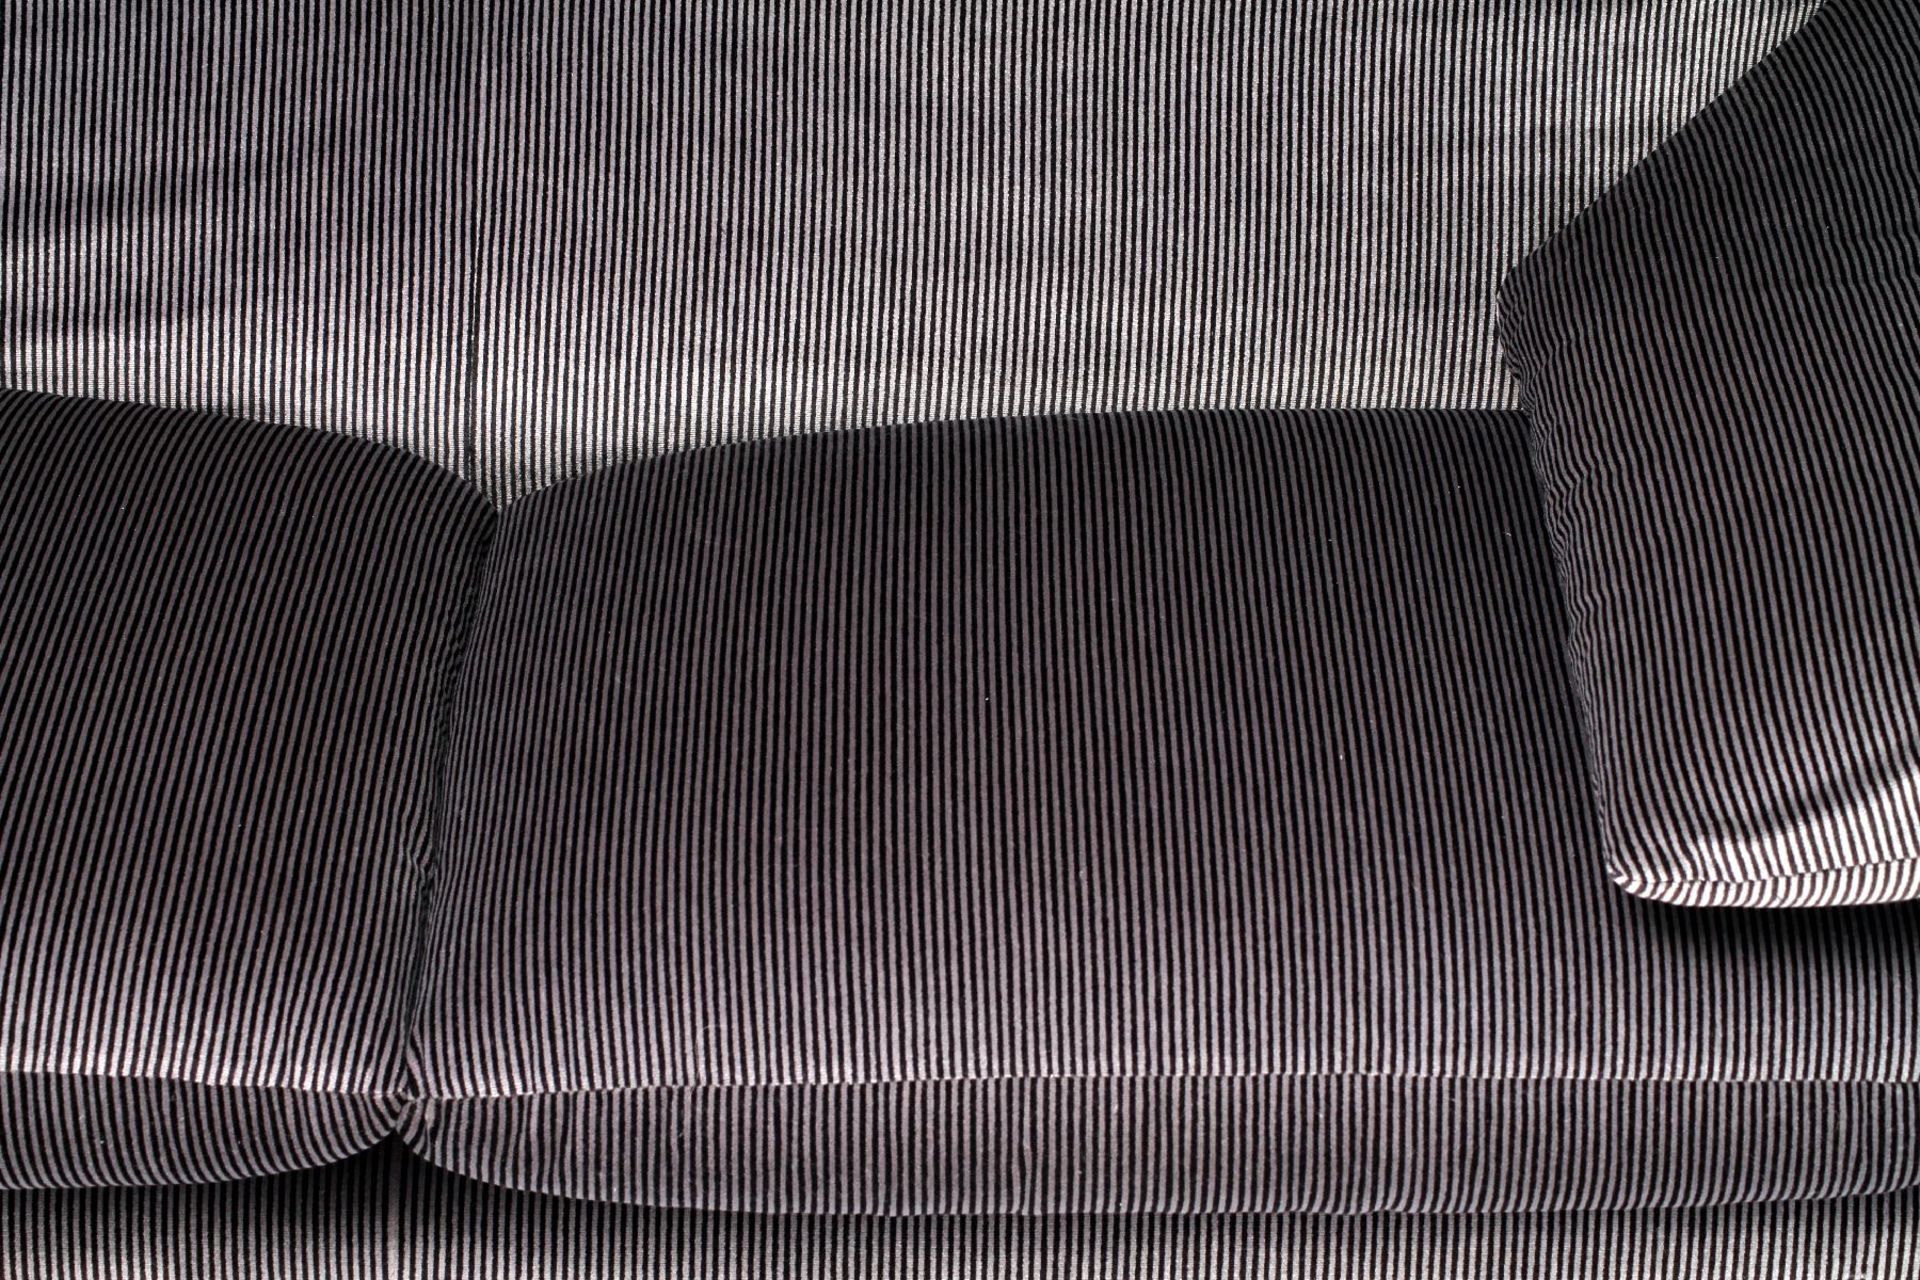 2-Seater Couch "Cassina", made in Italy, Modell: Maralunga, fabric cover vertical striped grey and - Image 4 of 5